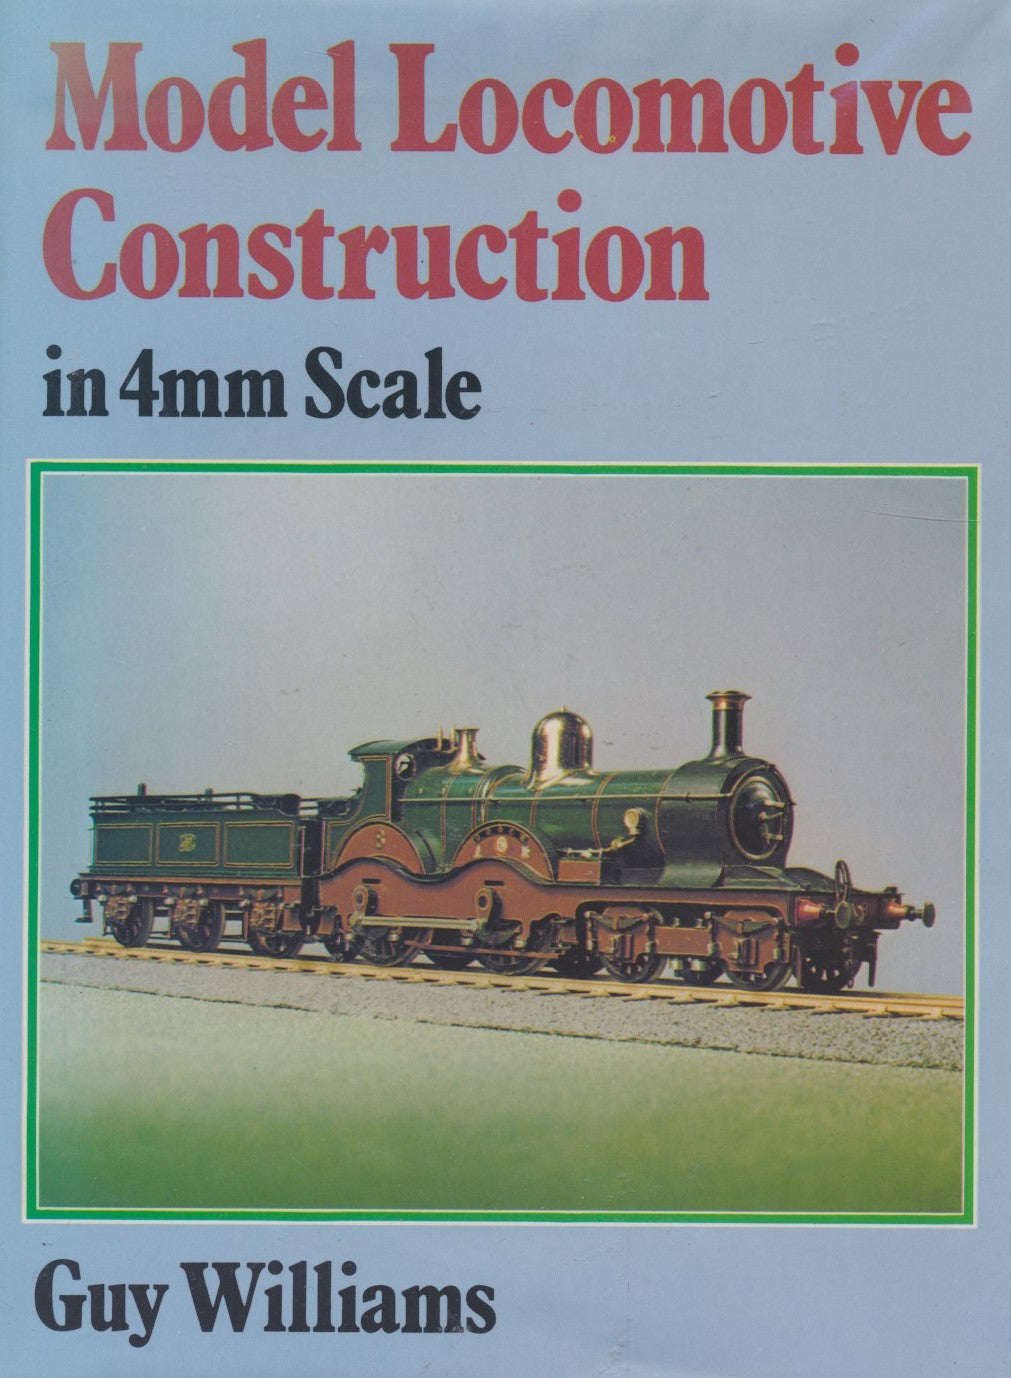 Model Locomotive Construction in 4mm Scale